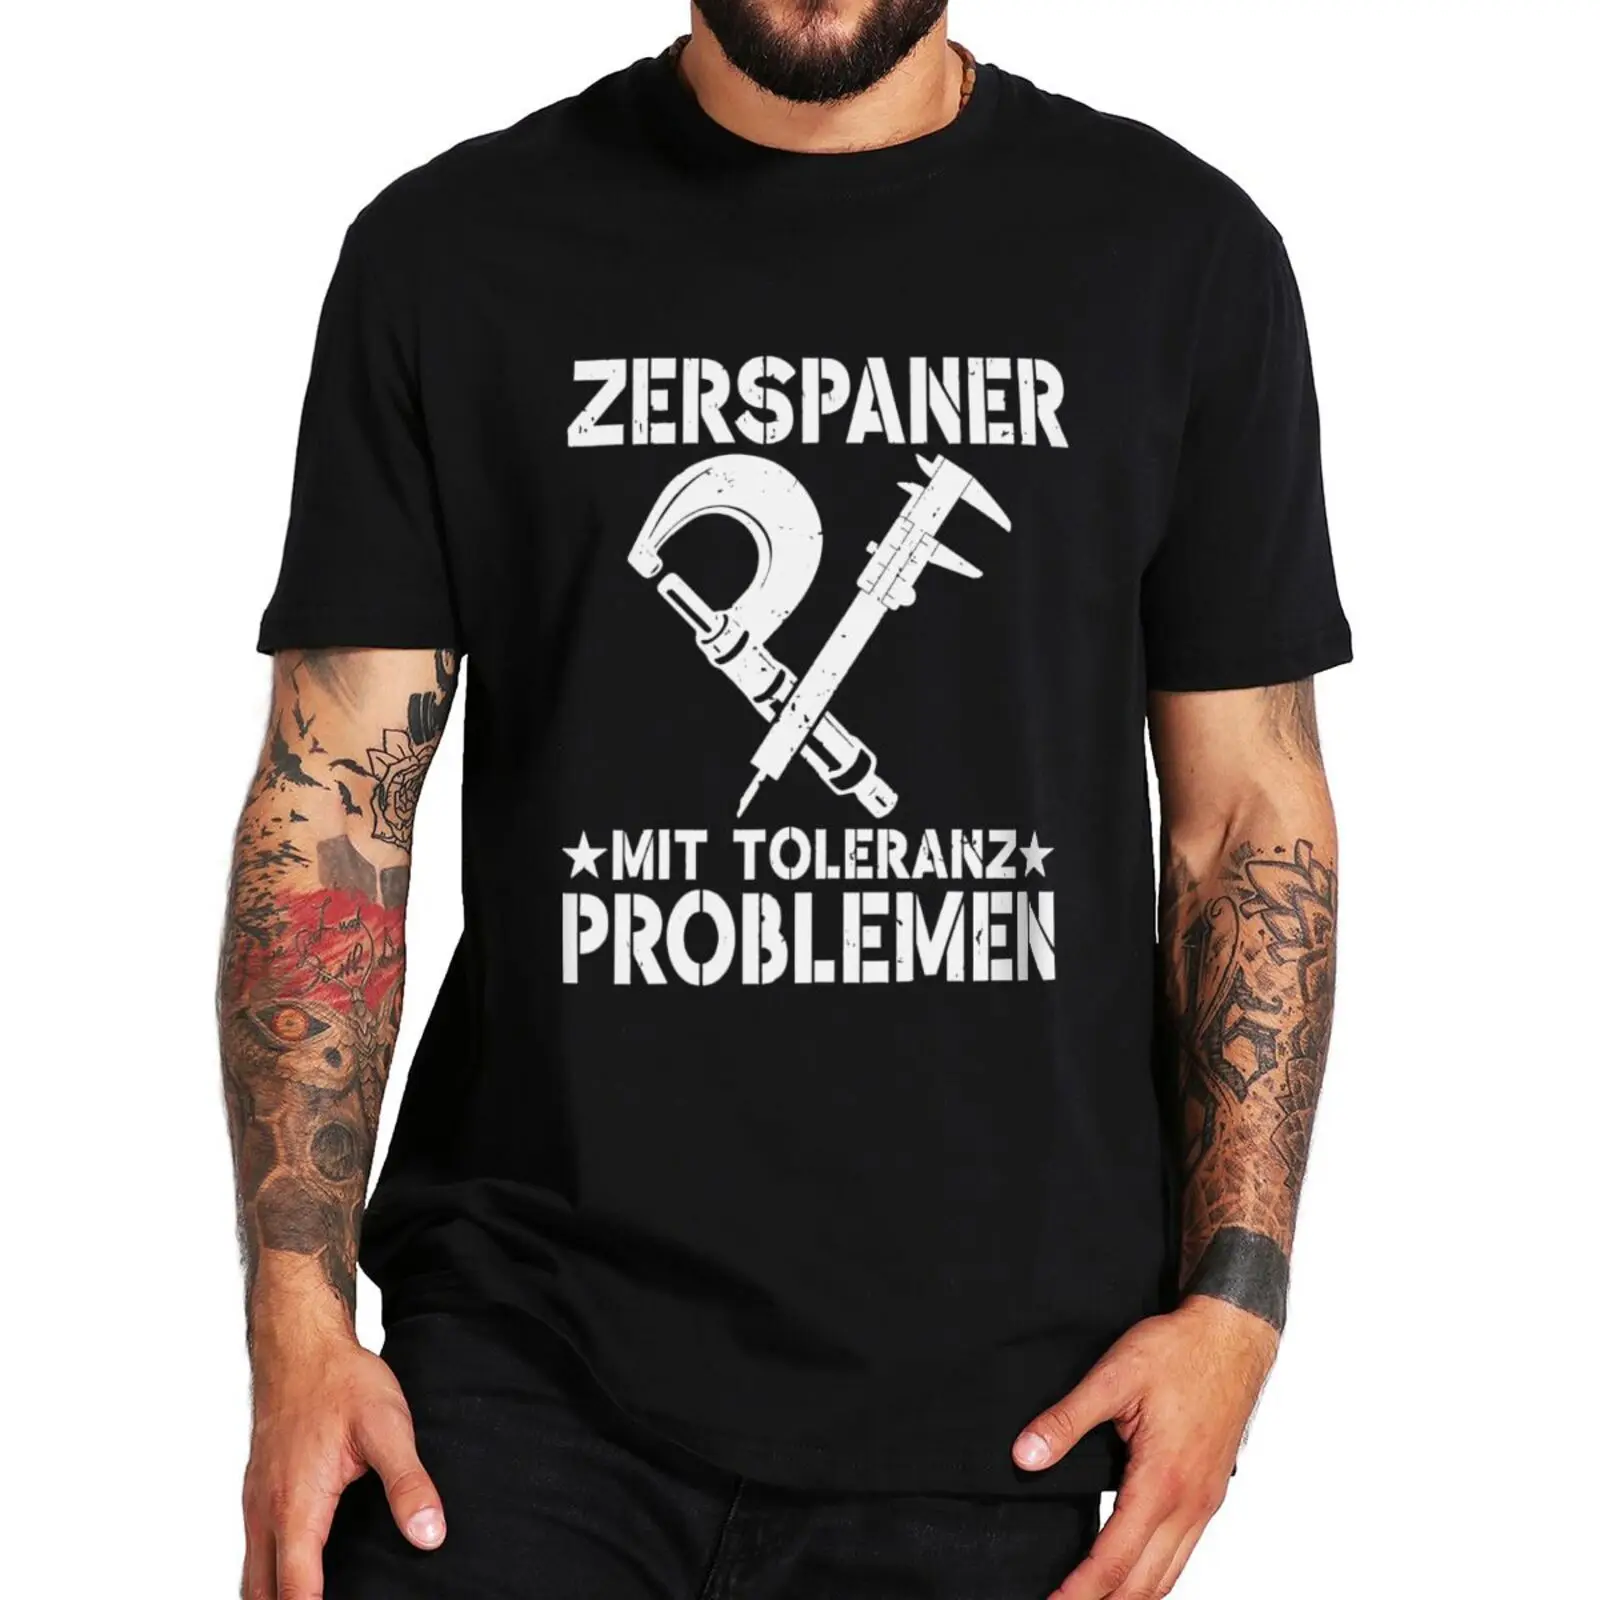 Zerspaner T Shirt Funny German Texts Mechanical Worker Dad Gift Tee Tops EU Size 100% Cotton Unisex O-neck Casual T-shirts